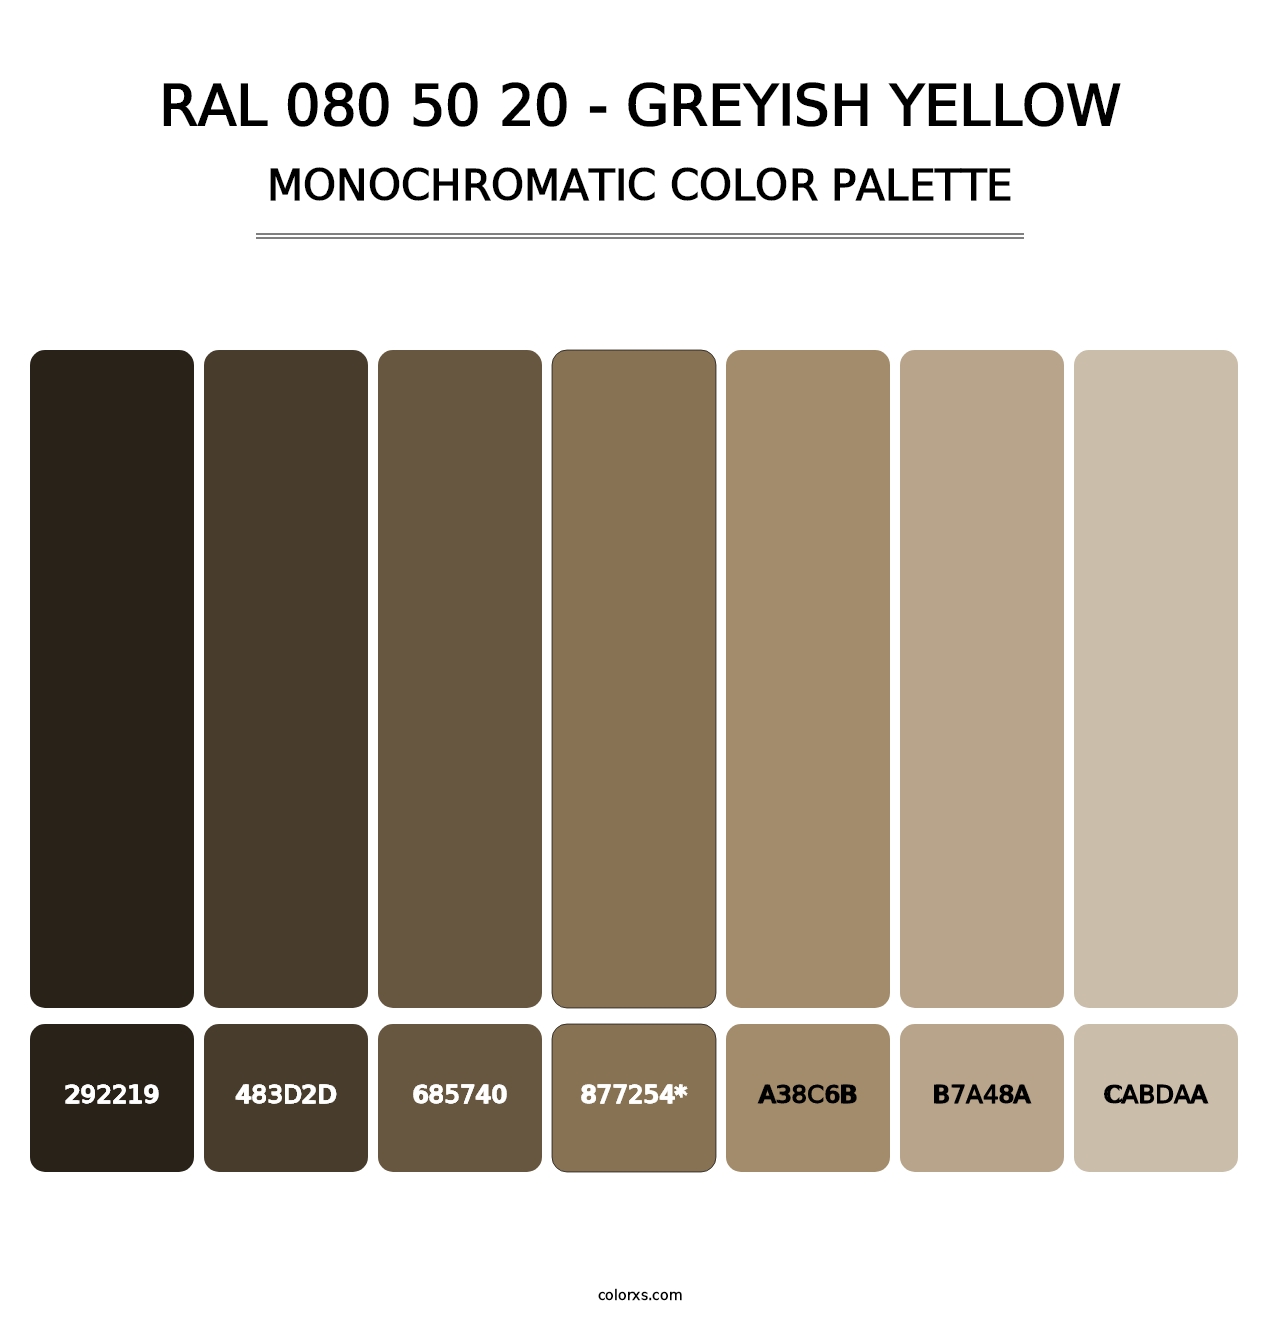 RAL 080 50 20 - Greyish Yellow - Monochromatic Color Palette